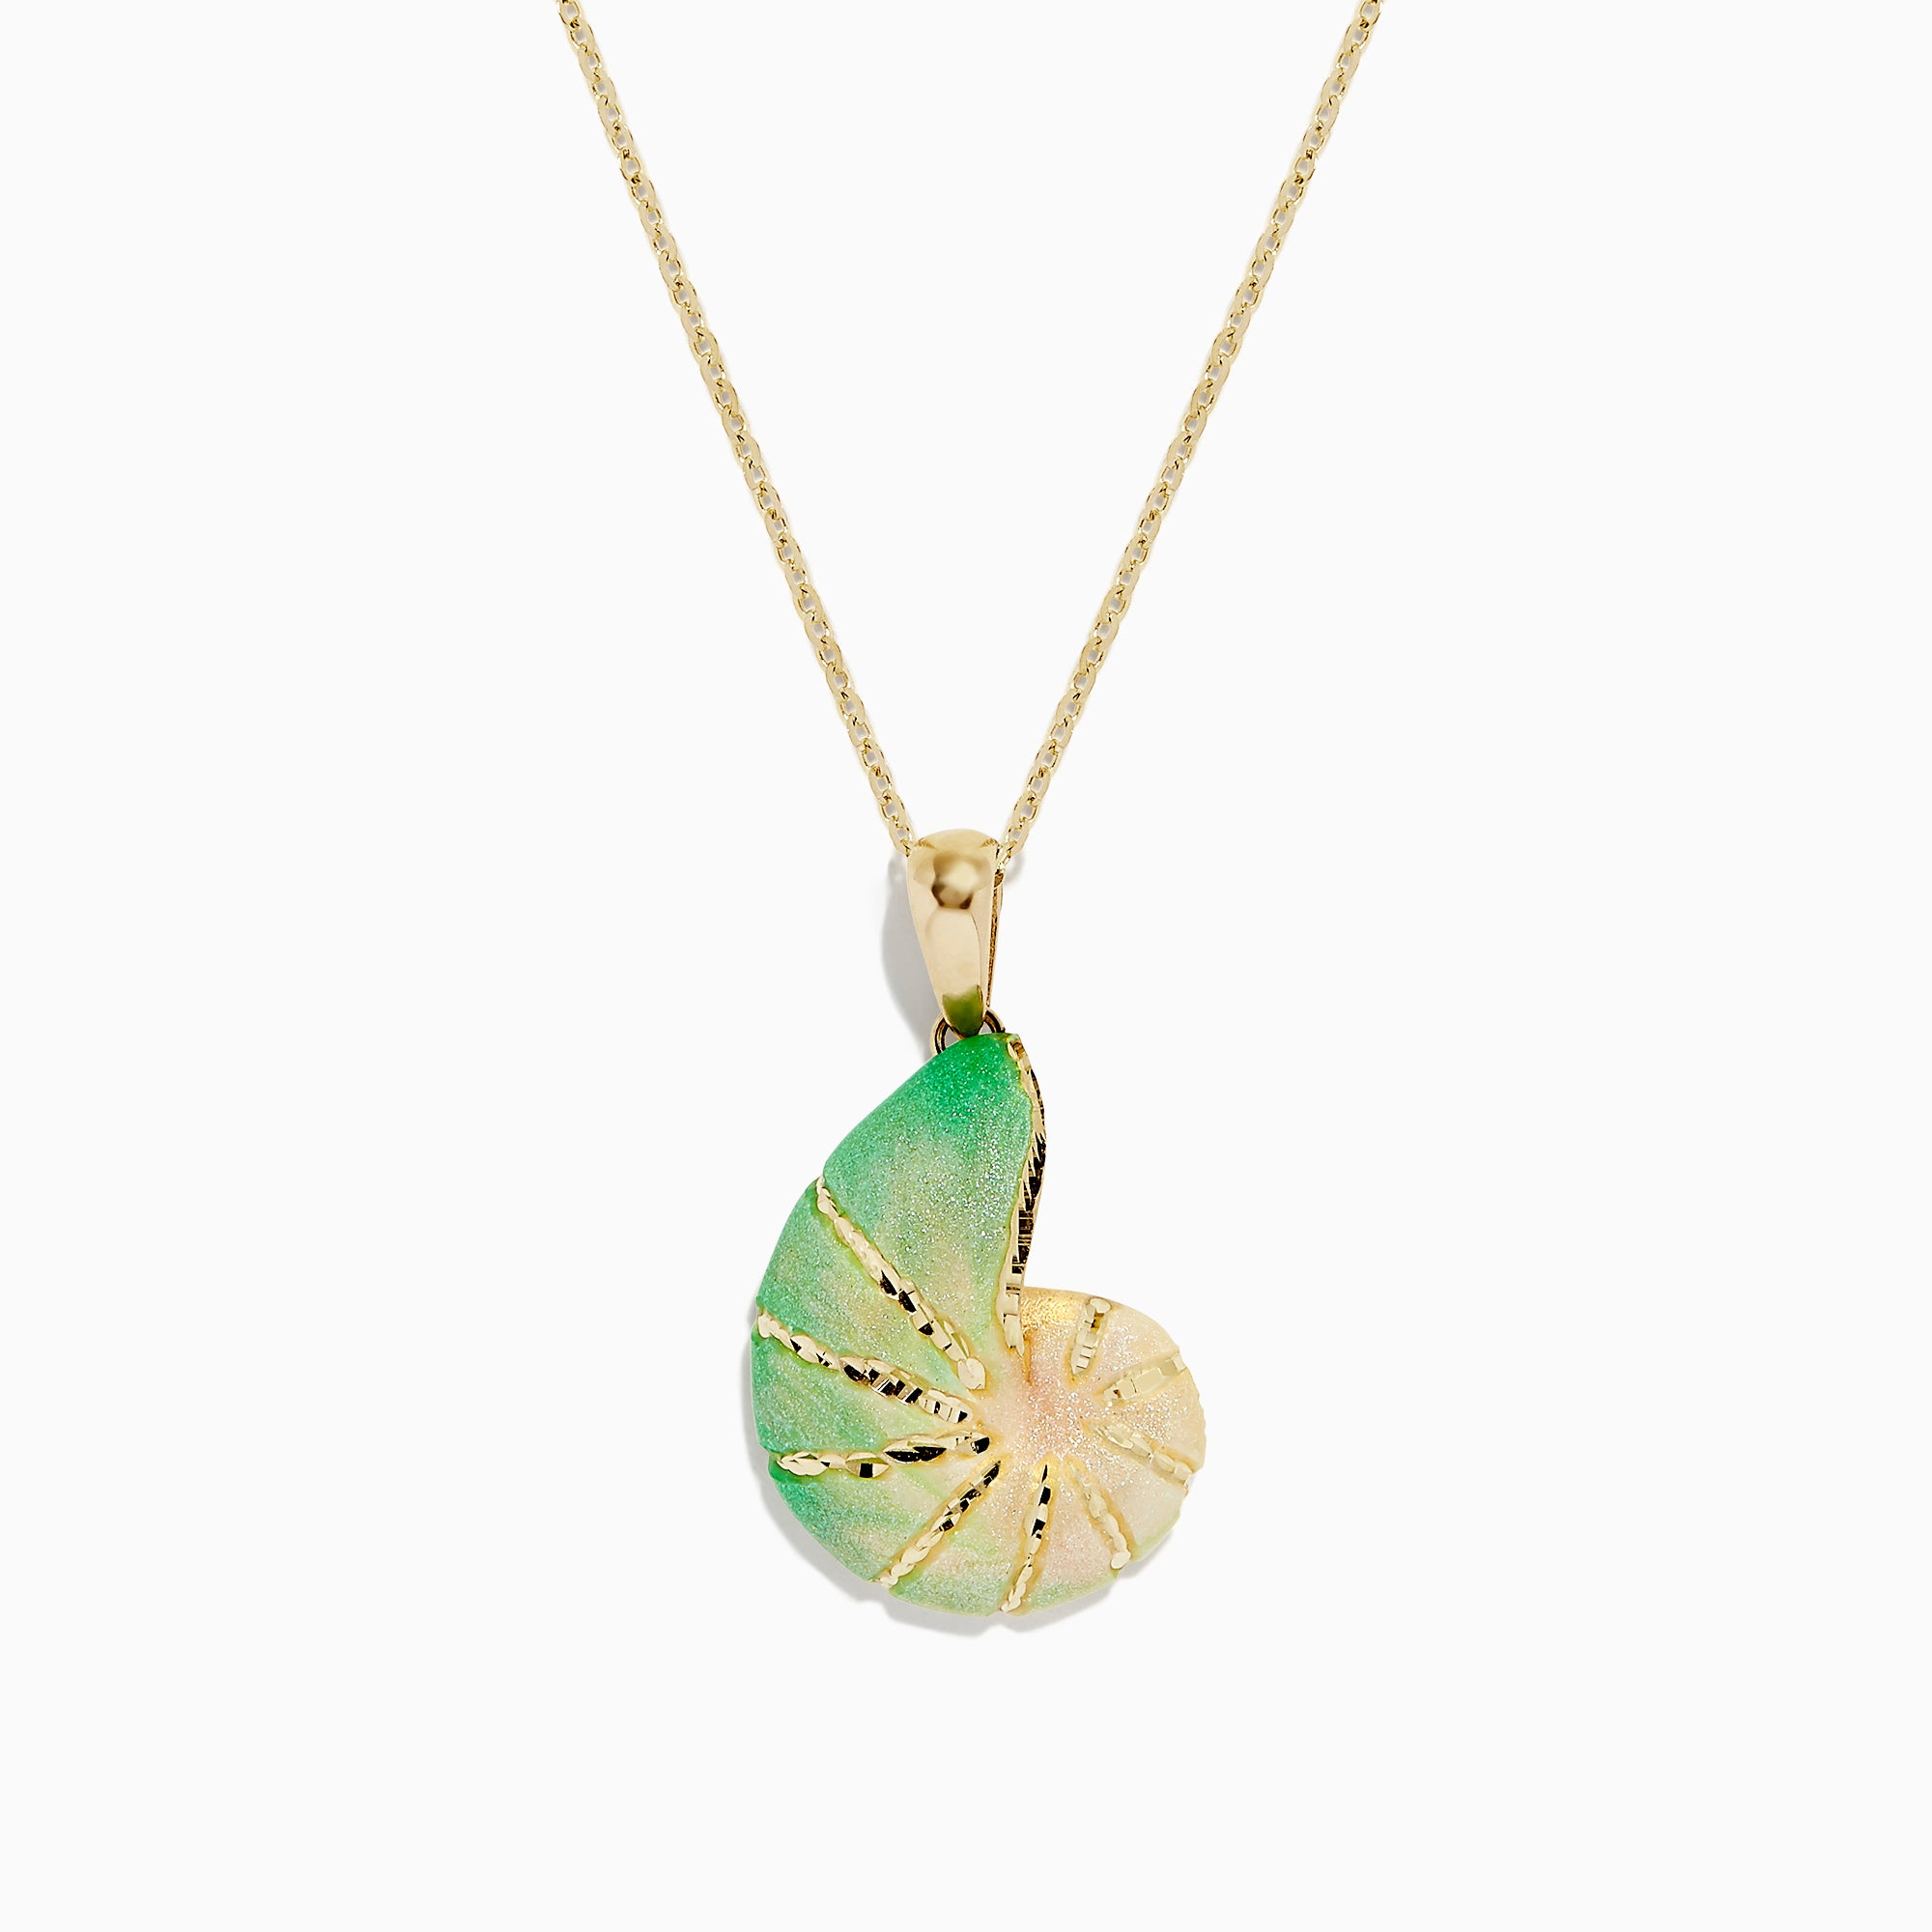 18K Rose Gold Plated Pendant Necklace Set with Green Stones for College and  Office - Jane Green Stone Pendant Set by Blingvine